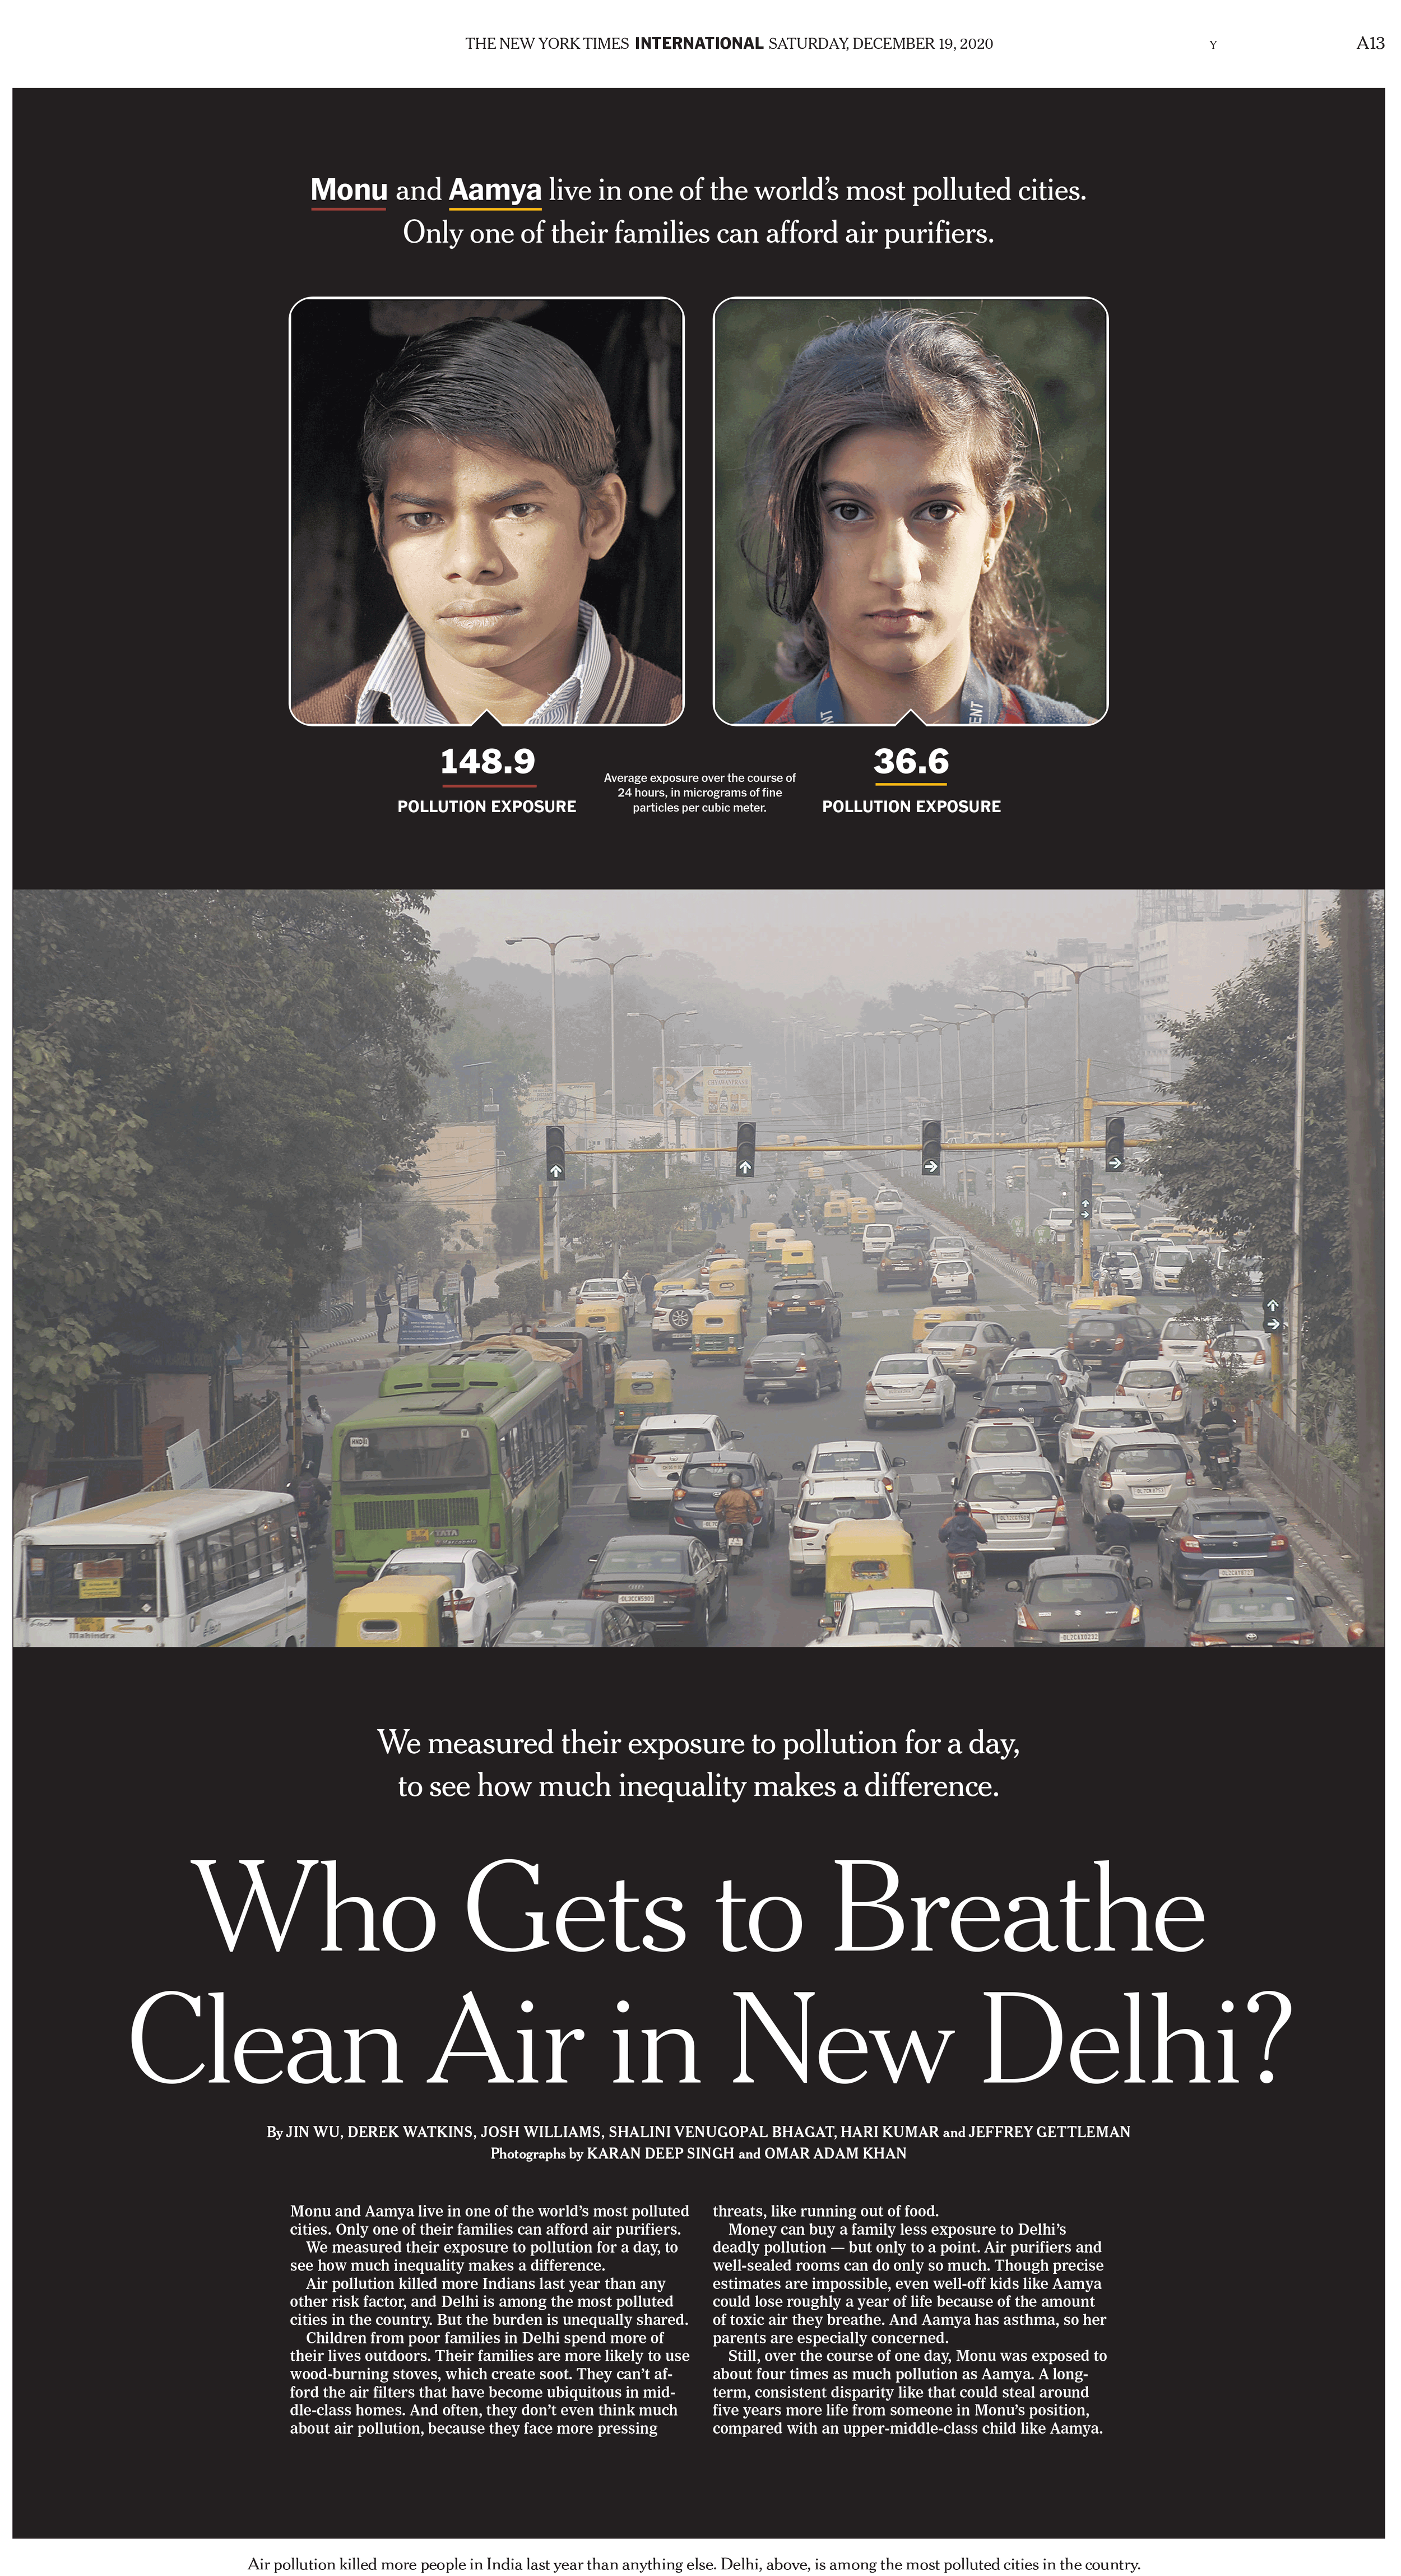 'Who Gets to Breathe Clean Air in New Delhi?'